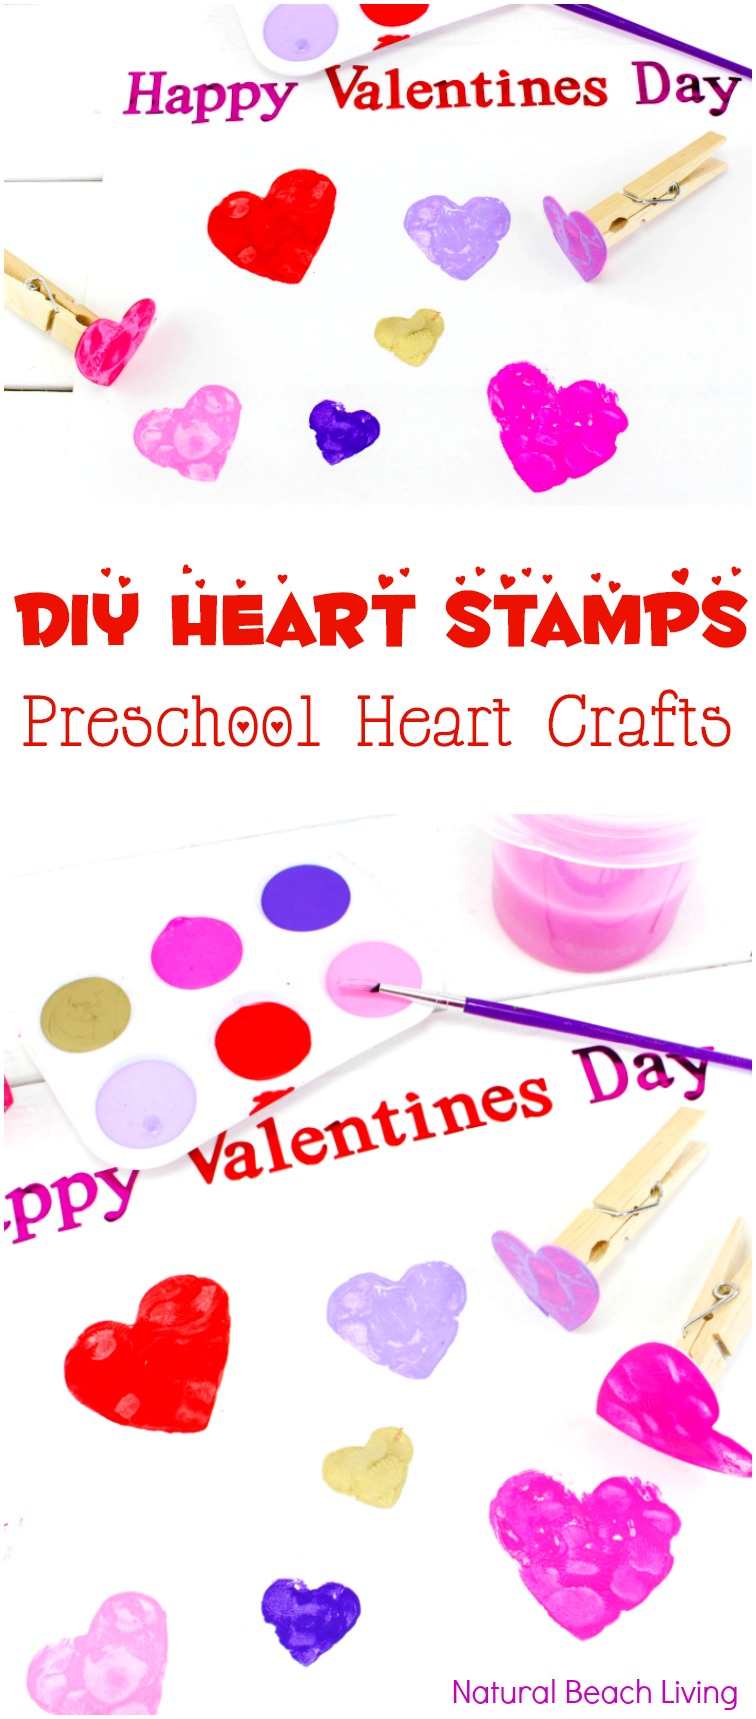 DIY Heart Stamps for Preschool Heart Crafts, Easy Heart Art for Valentine's Day, Preschool Valentines Crafts and Fine Motor Activities for toddlers and preschoolers, Easy Preschool Art Projects for a heart theme, Fun Kindergarten and Preschool heart crafts, February Preschool Themes, Crafts for kids 